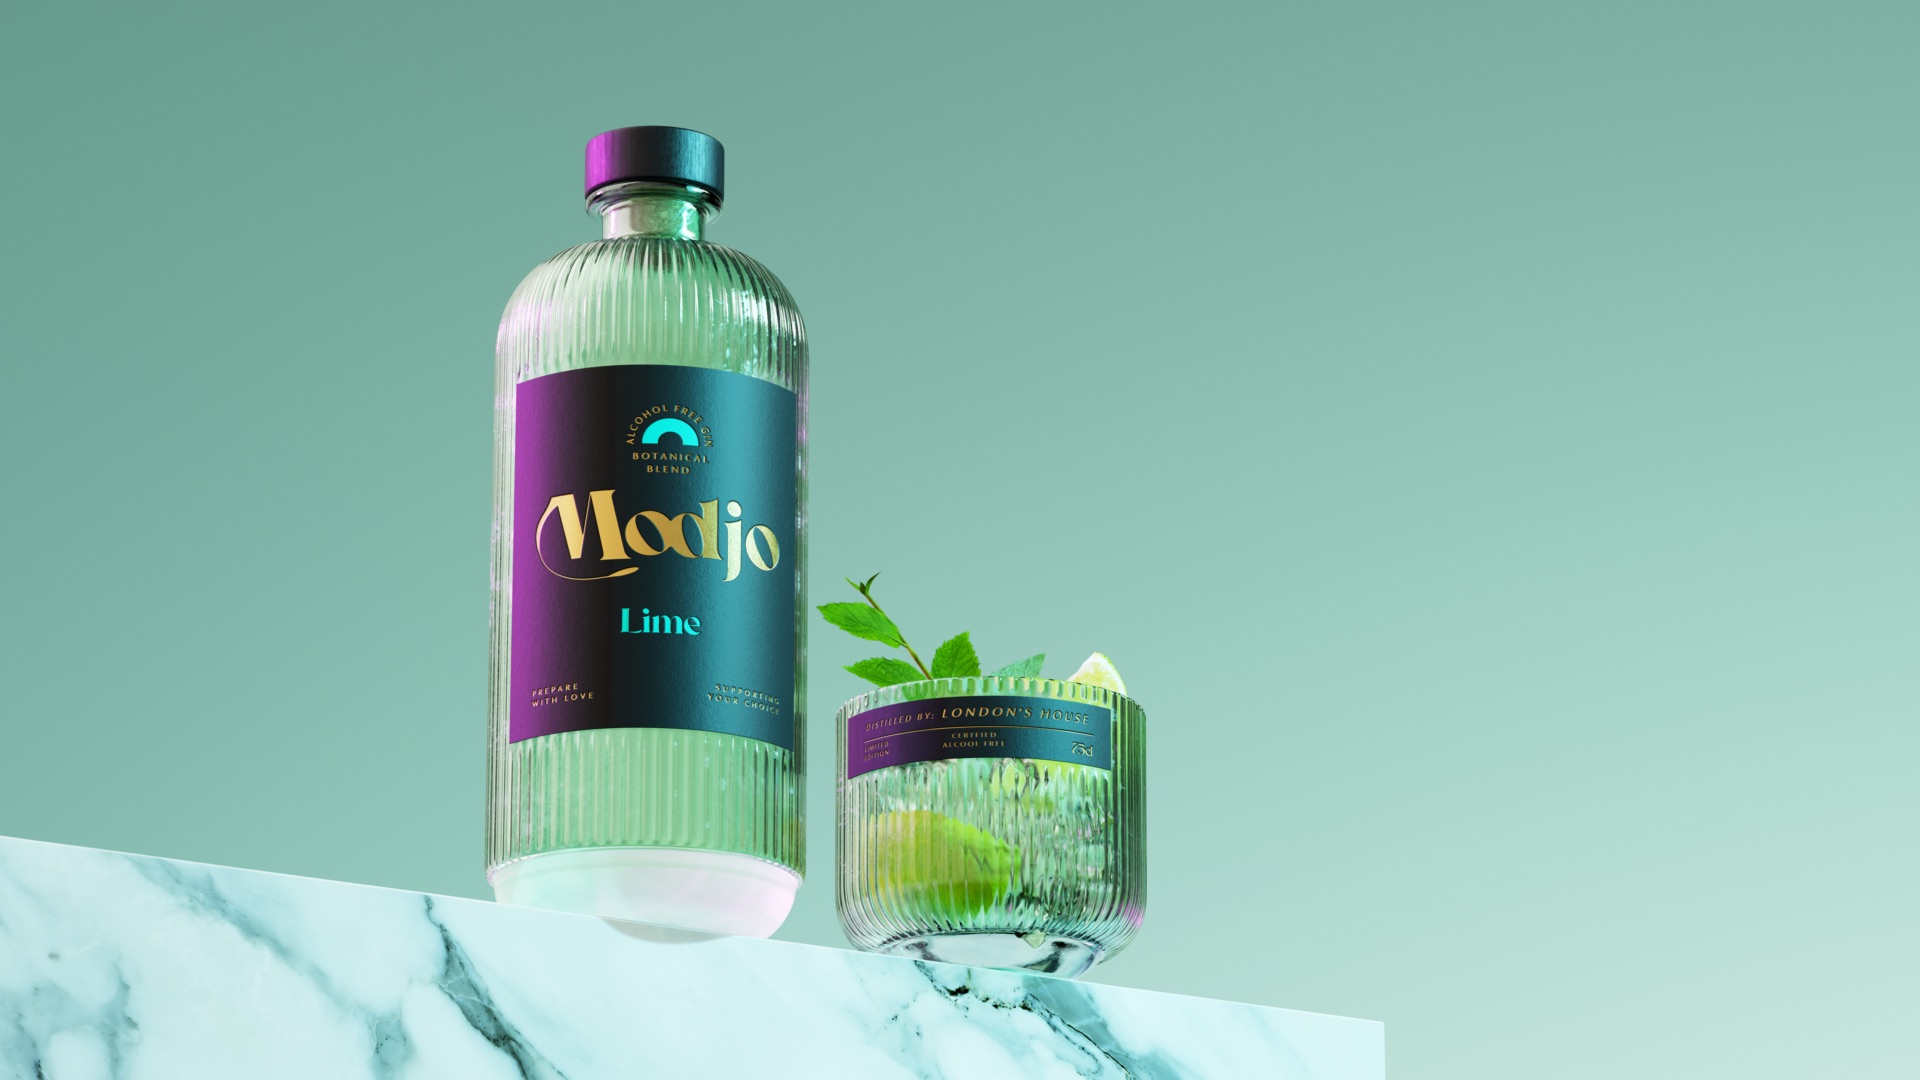 Win Creating Images Create Unpublished Packaging Design Concept